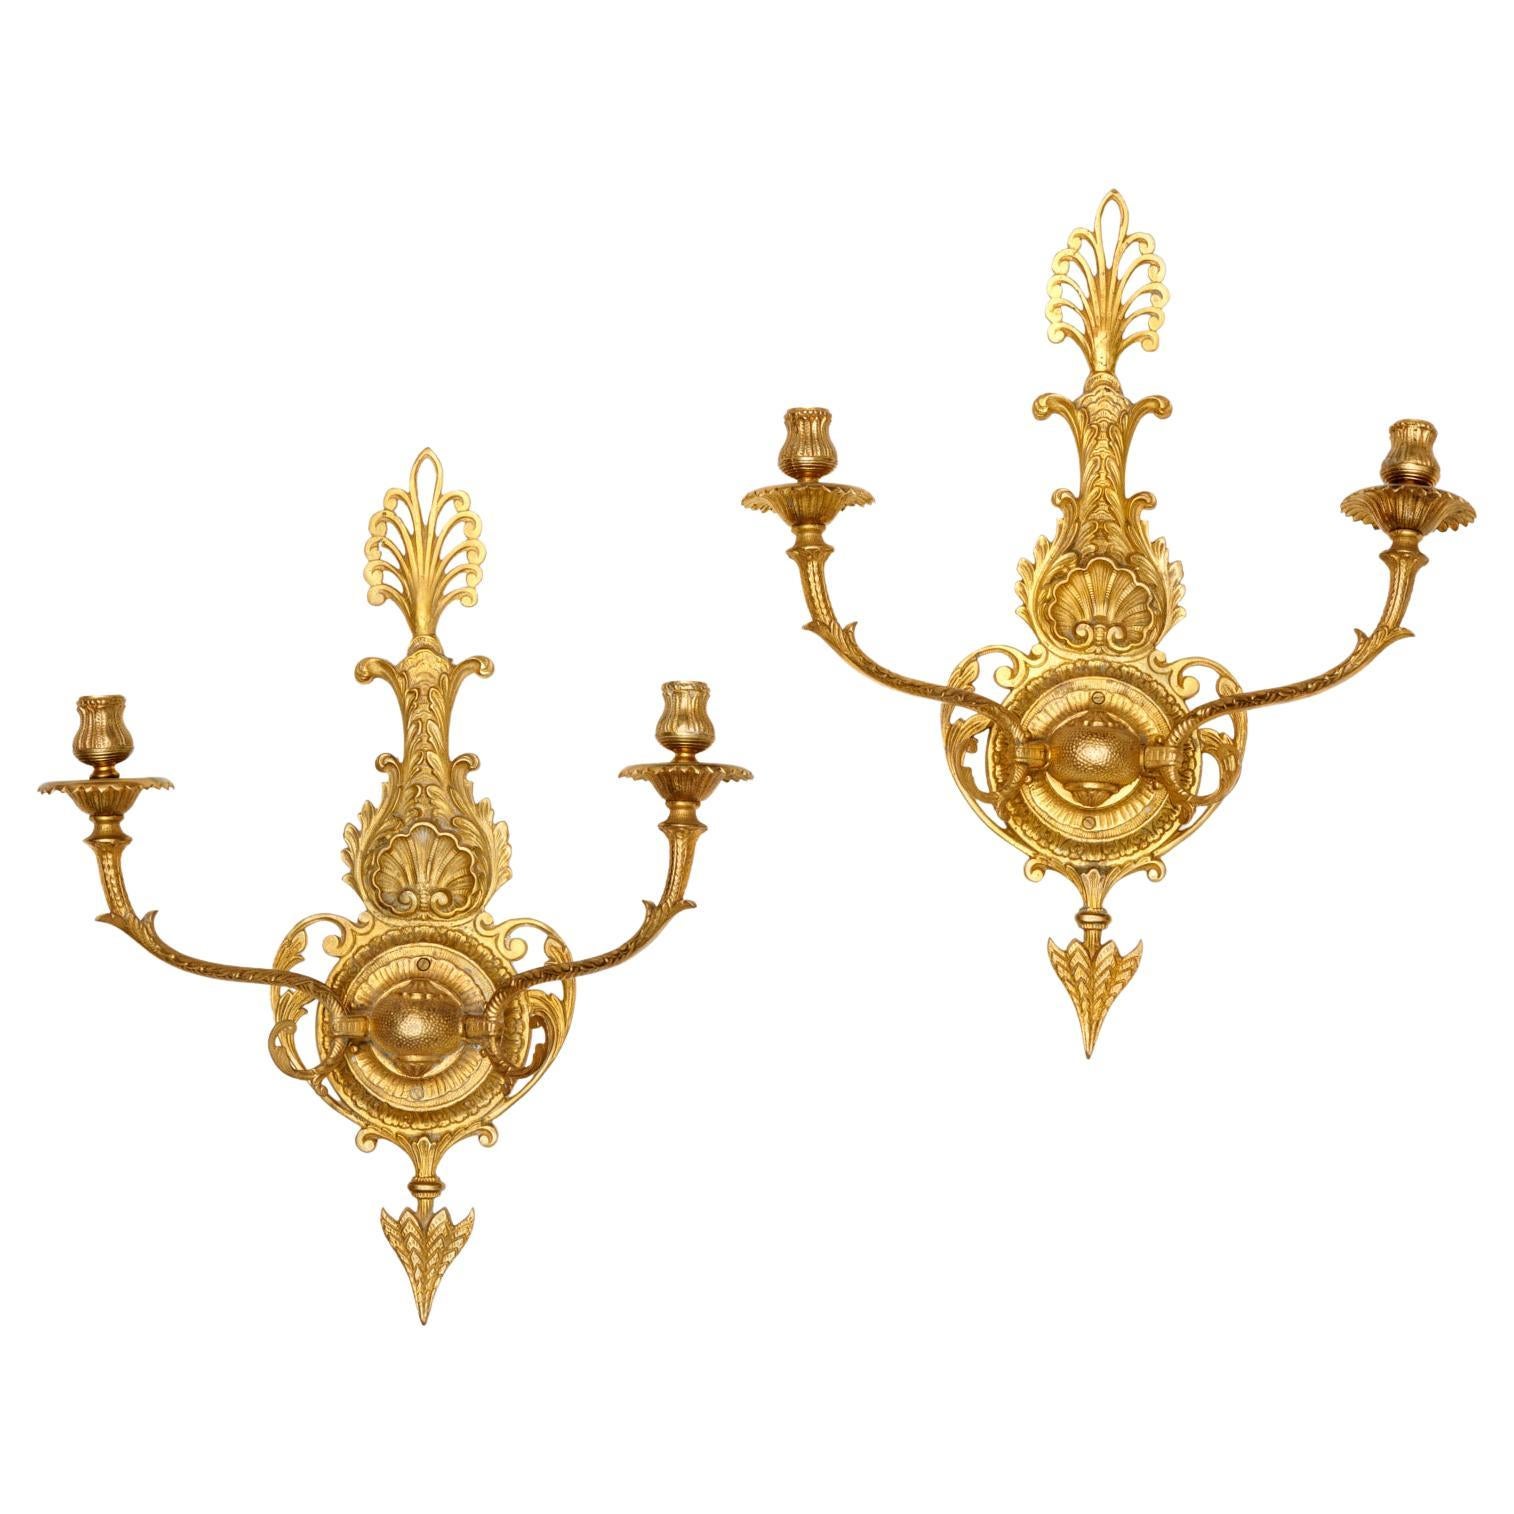 Pair of George III Style Gilt Bronze Candle Sconces